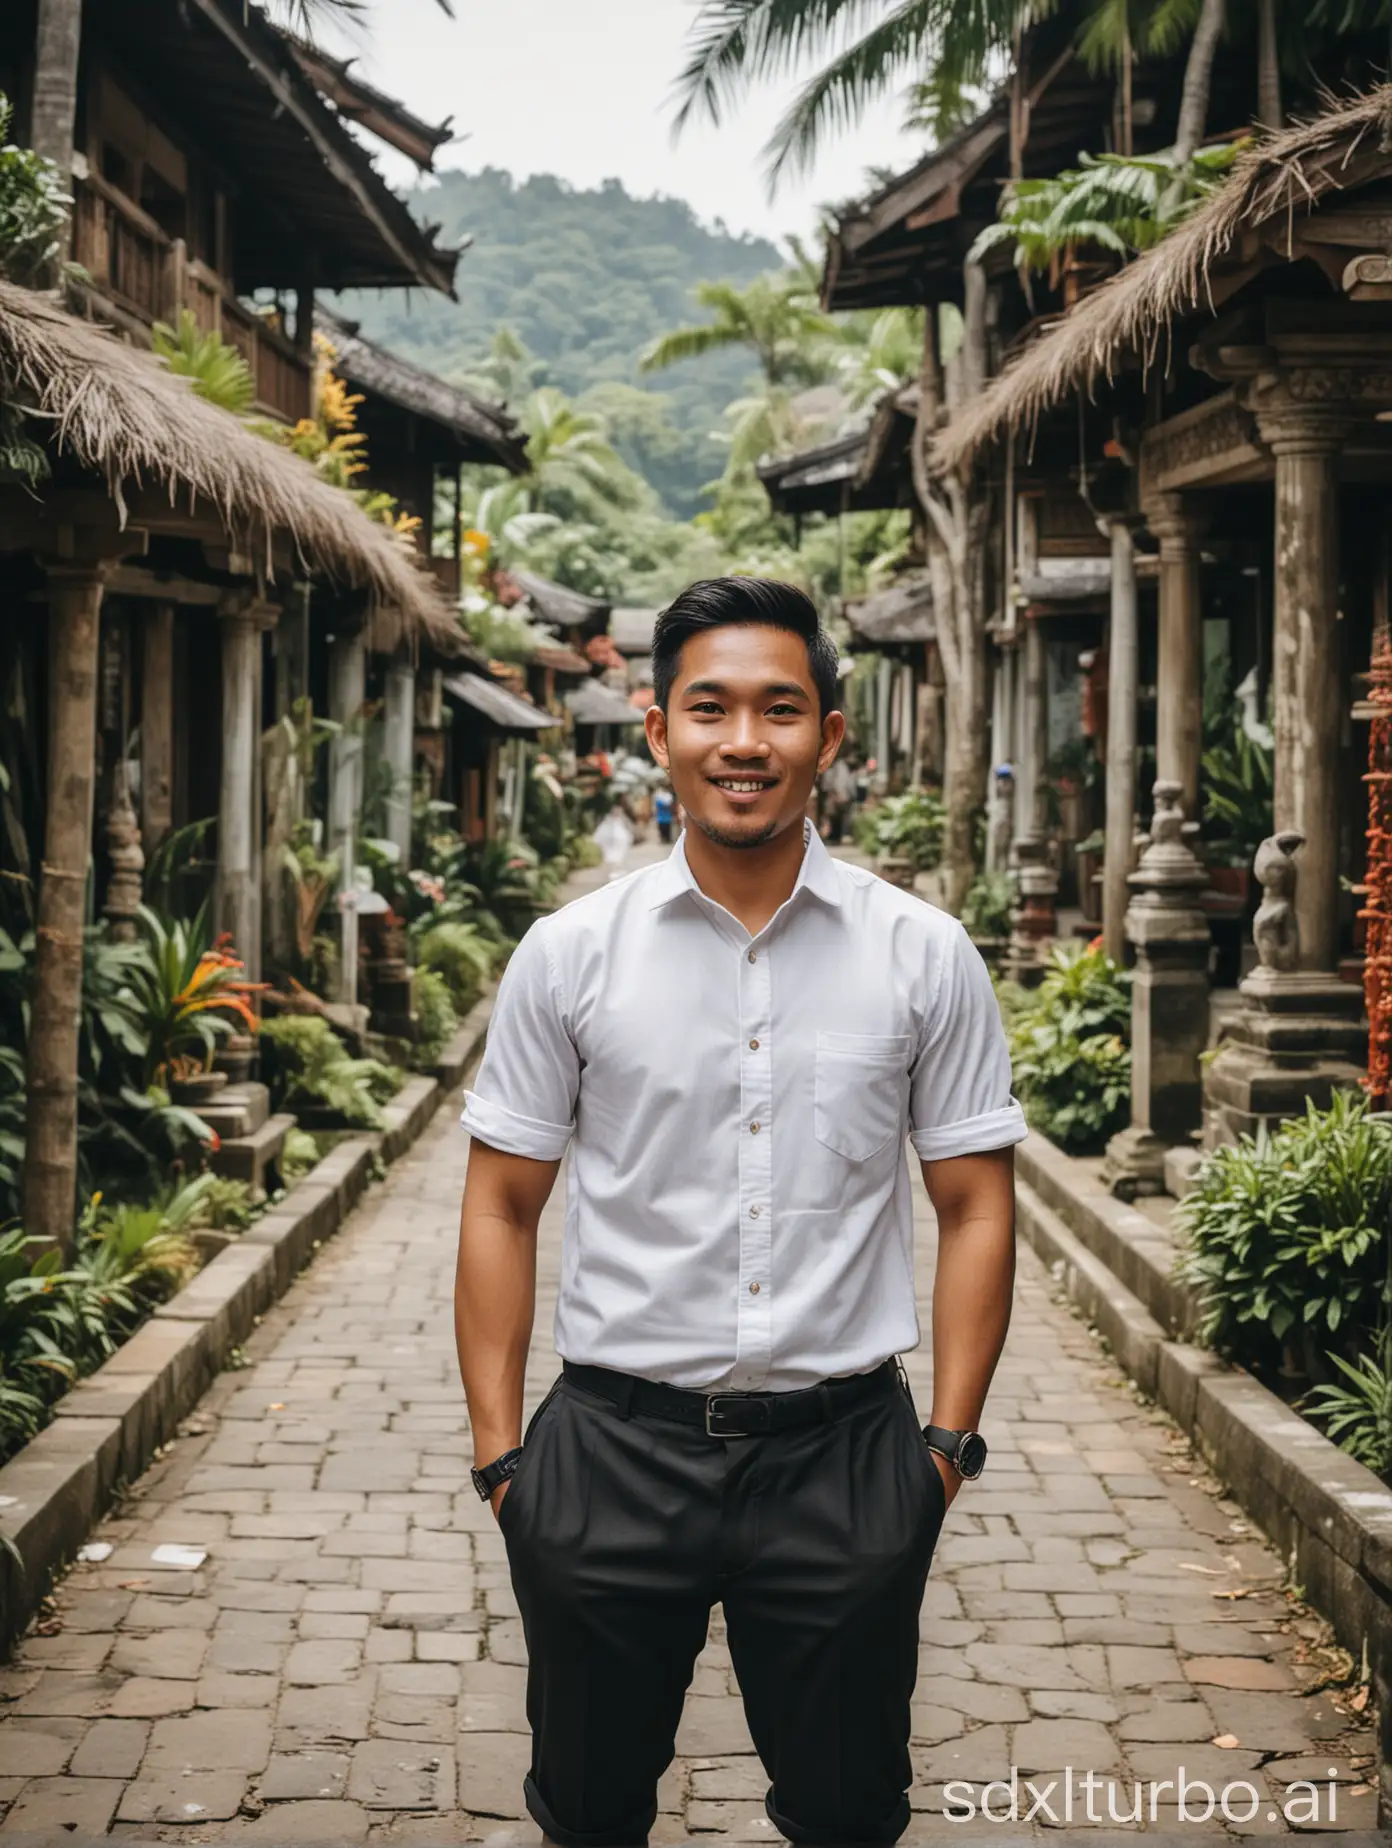 a man from indonesia who studies in thailand and runs a travel agent business in bali